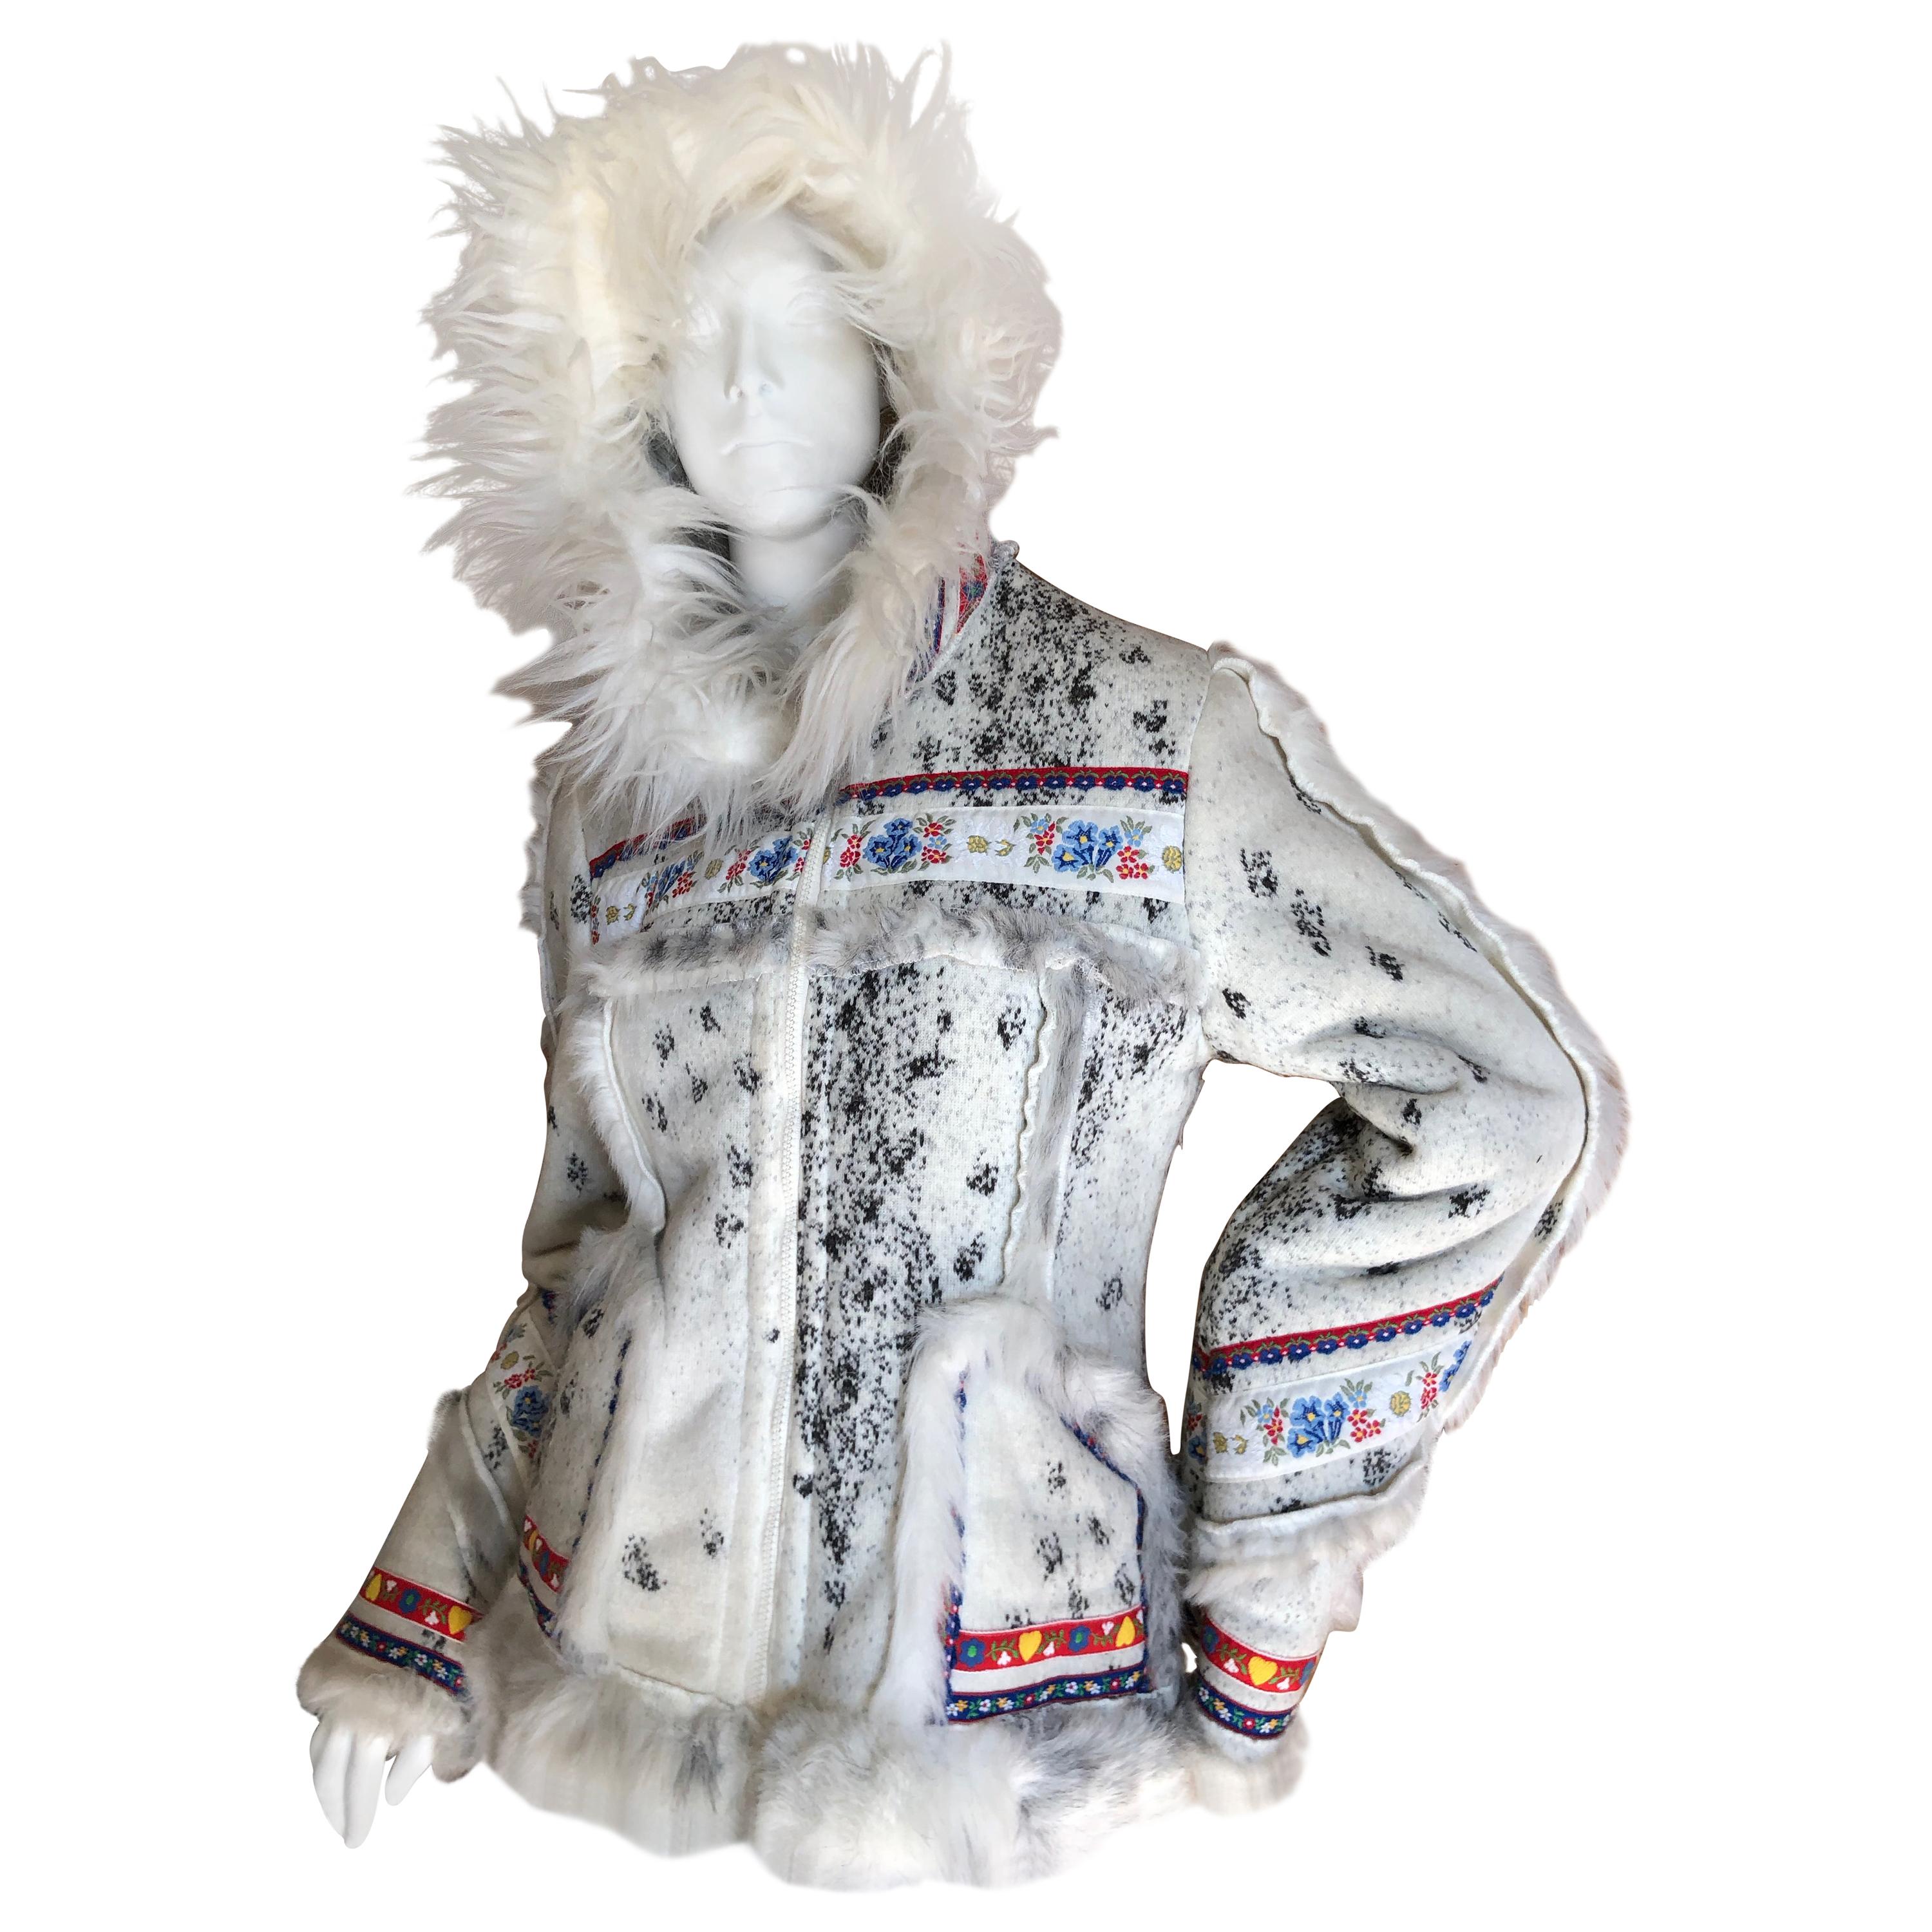 Anna Sui MAD Museum Exhibited Faux Shearling Folkloric Hooded Jacket For Sale